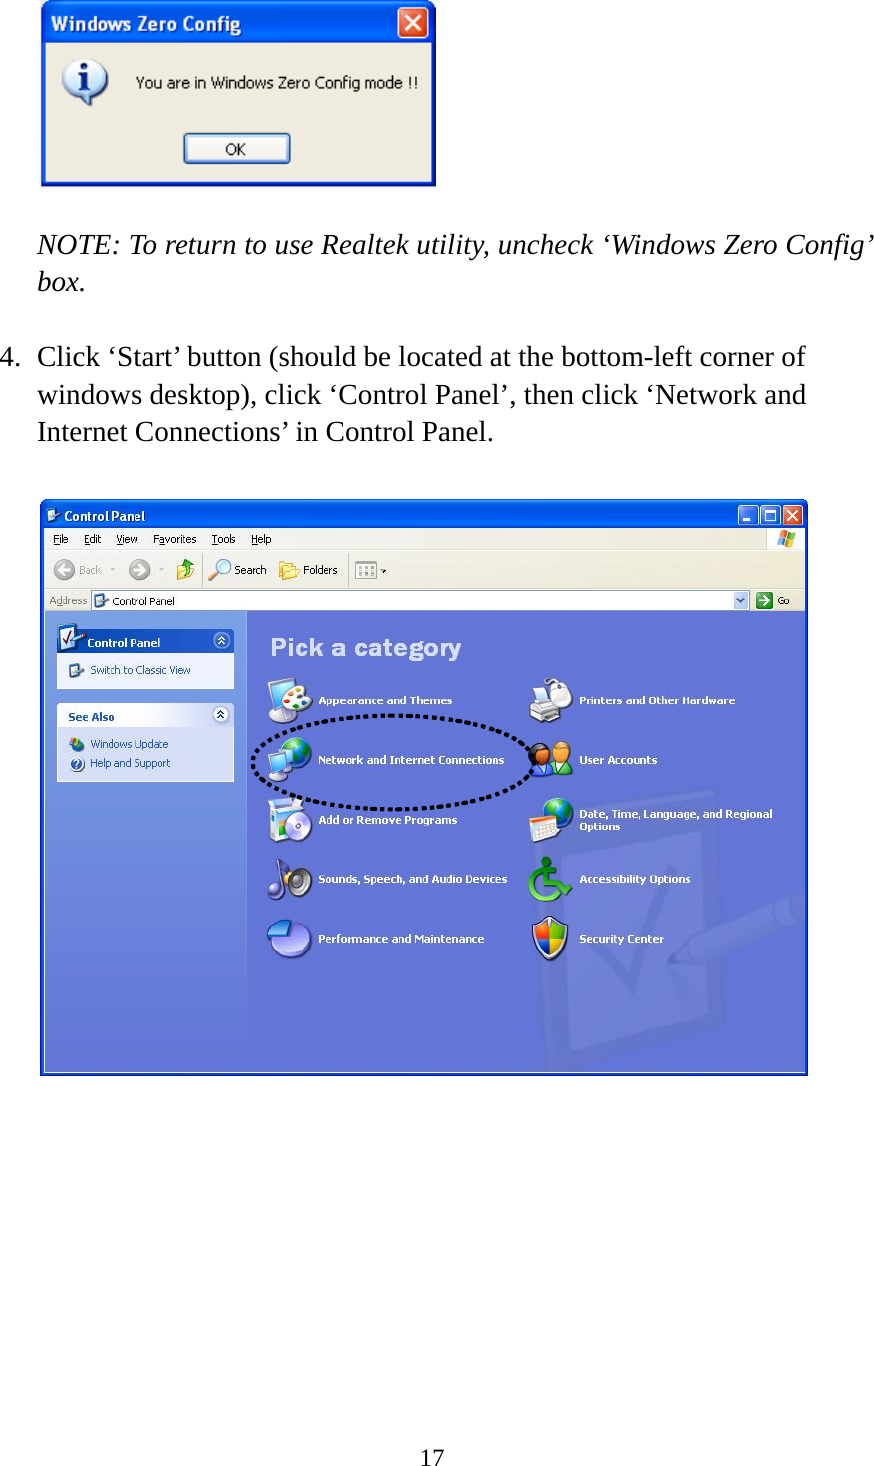 17    NOTE: To return to use Realtek utility, uncheck ‘Windows Zero Config’ box.  4. Click ‘Start’ button (should be located at the bottom-left corner of windows desktop), click ‘Control Panel’, then click ‘Network and Internet Connections’ in Control Panel.      